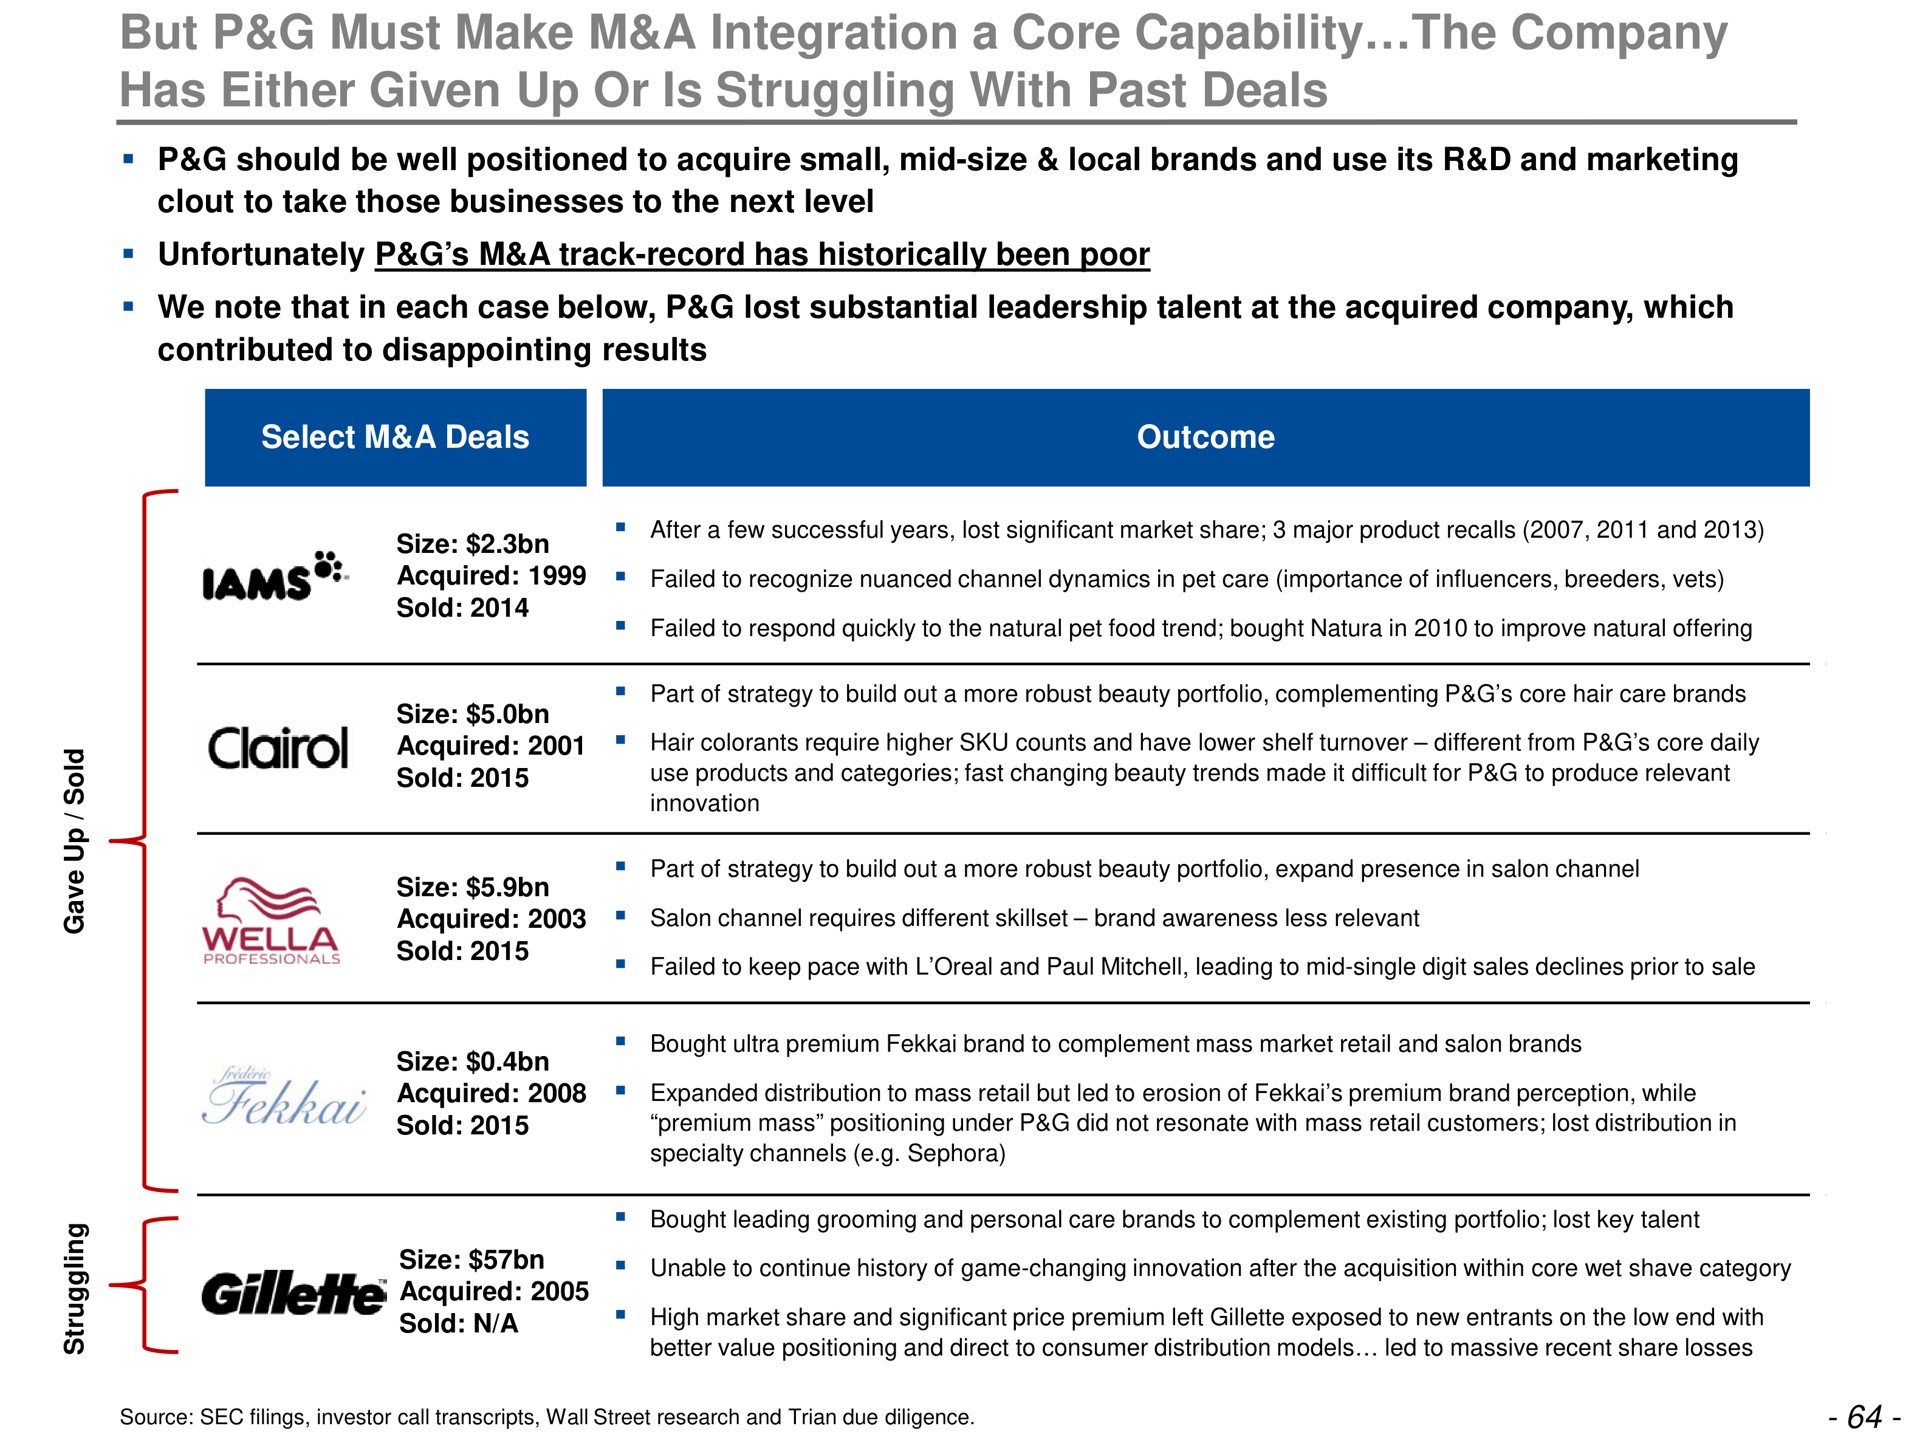 but must make a integration a core capability the company has either given up or is struggling with past deals | Trian Partners